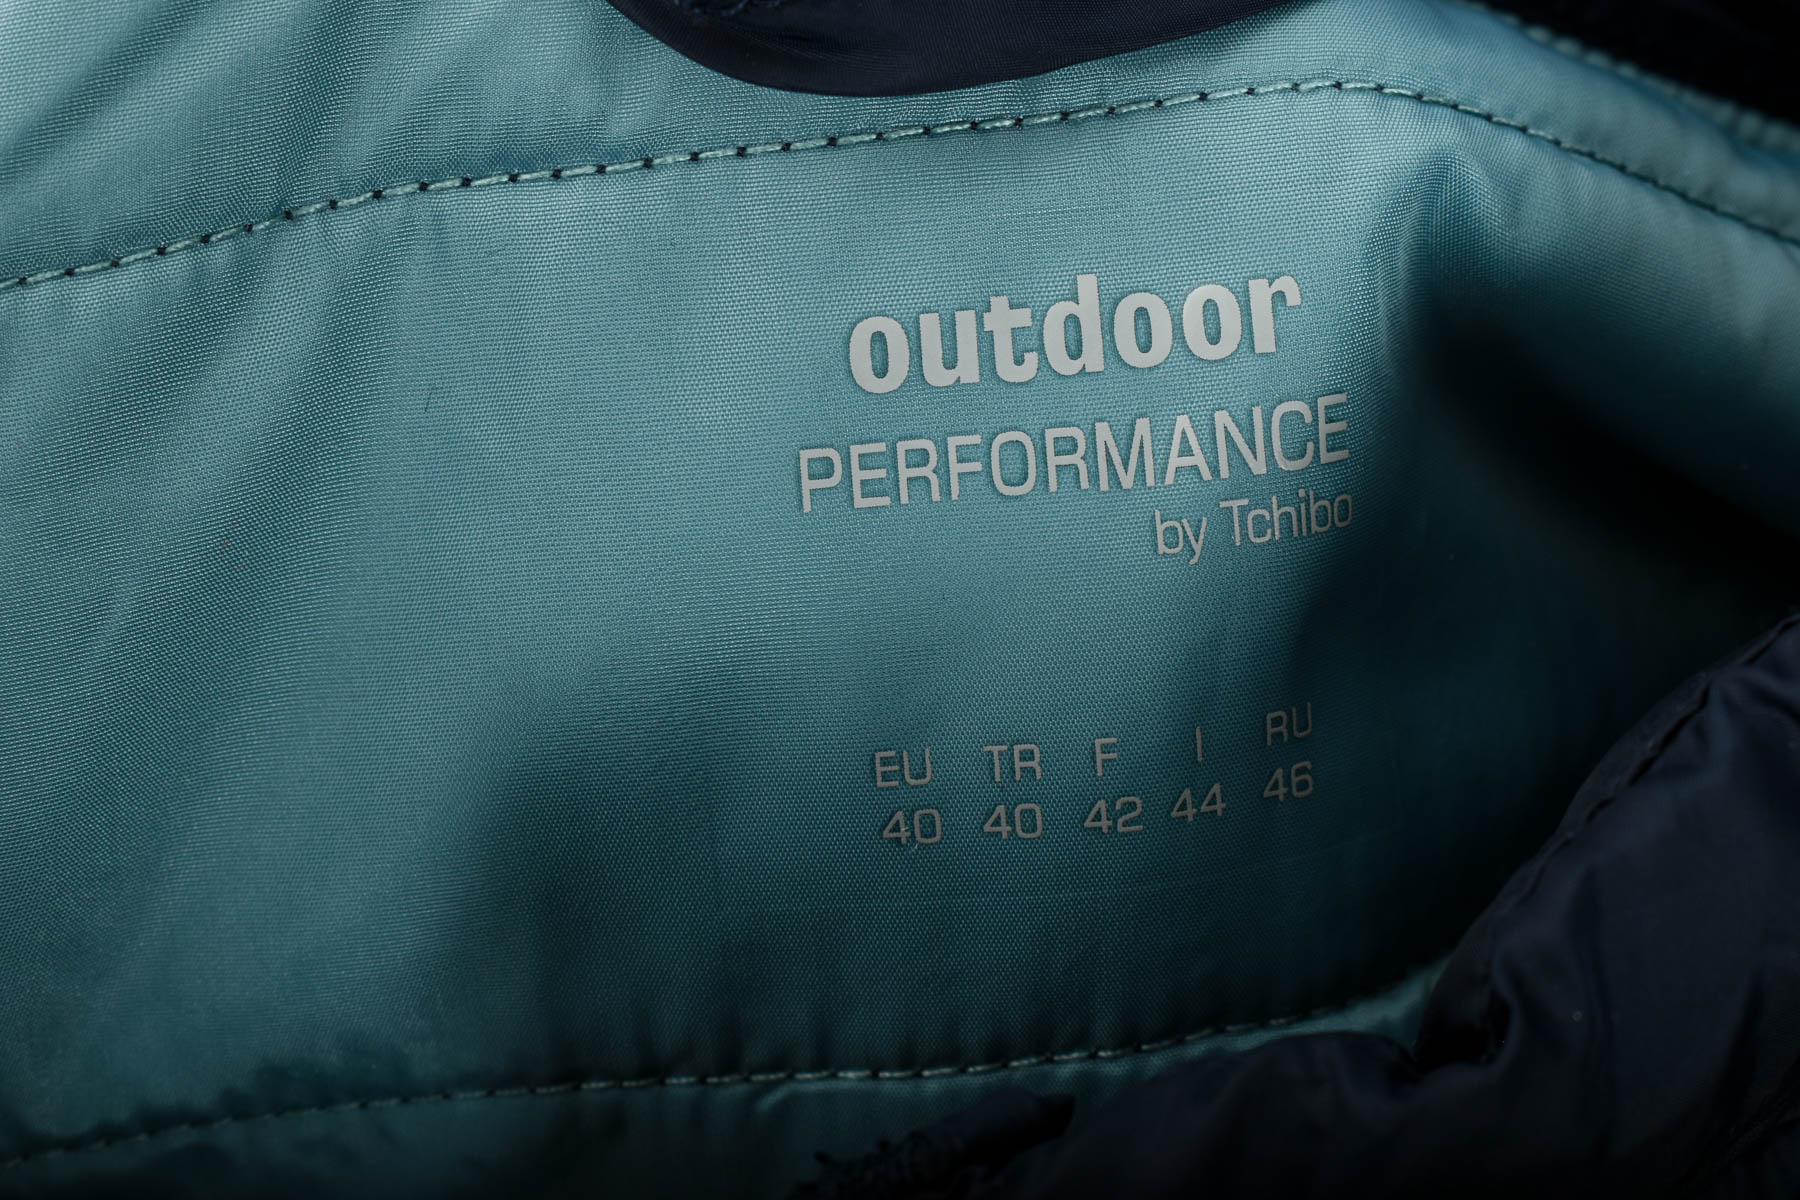 Female jacket - Outdoor PERFORMANCE by Tchibo - 2